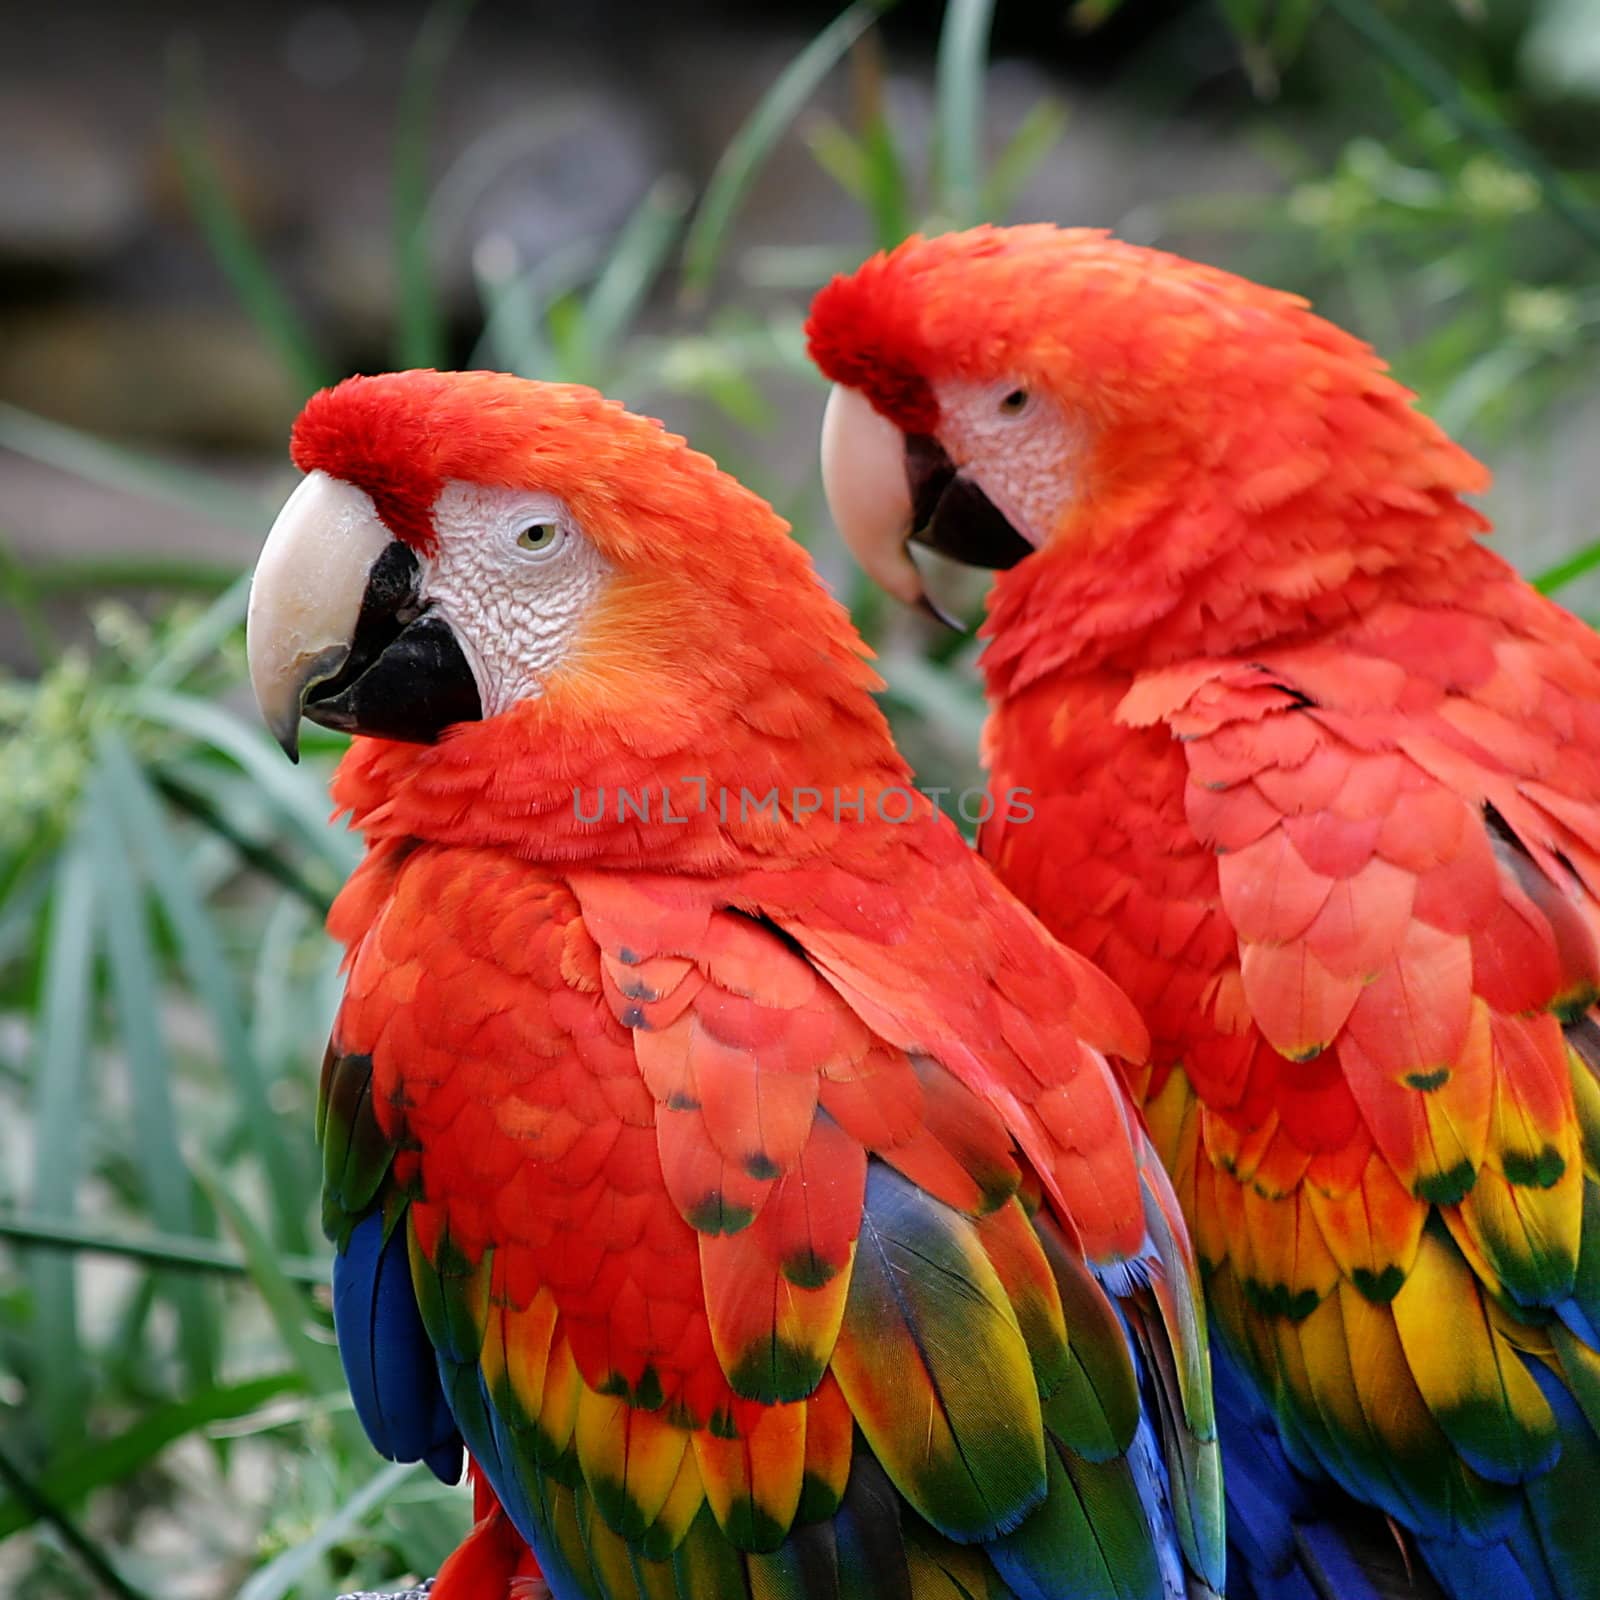 The Scarlet Macaws is a large colorful parrot.